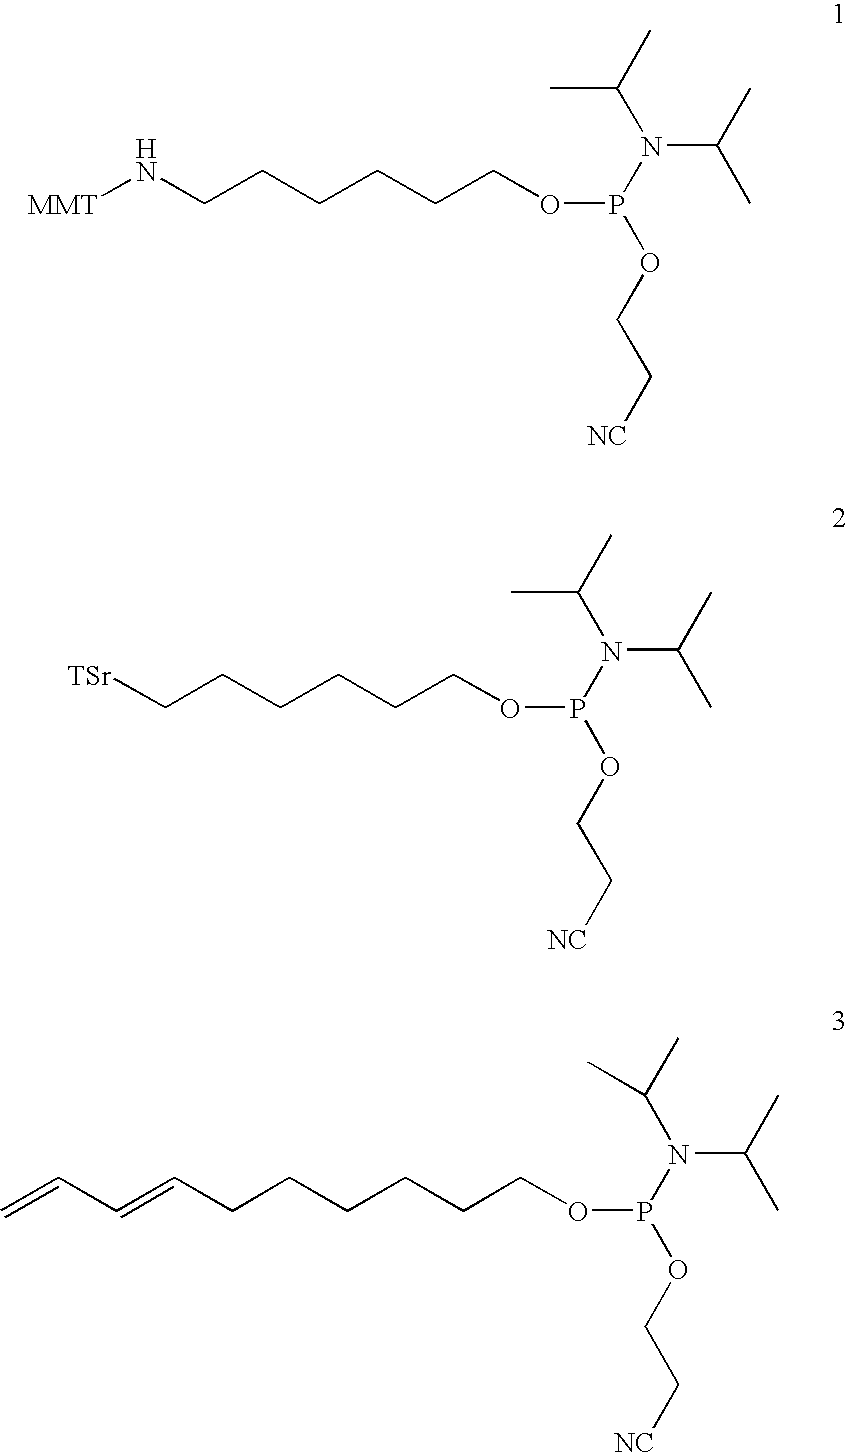 Nucleic acid probes and methods to detect and/or quantify nucleic acid analytes